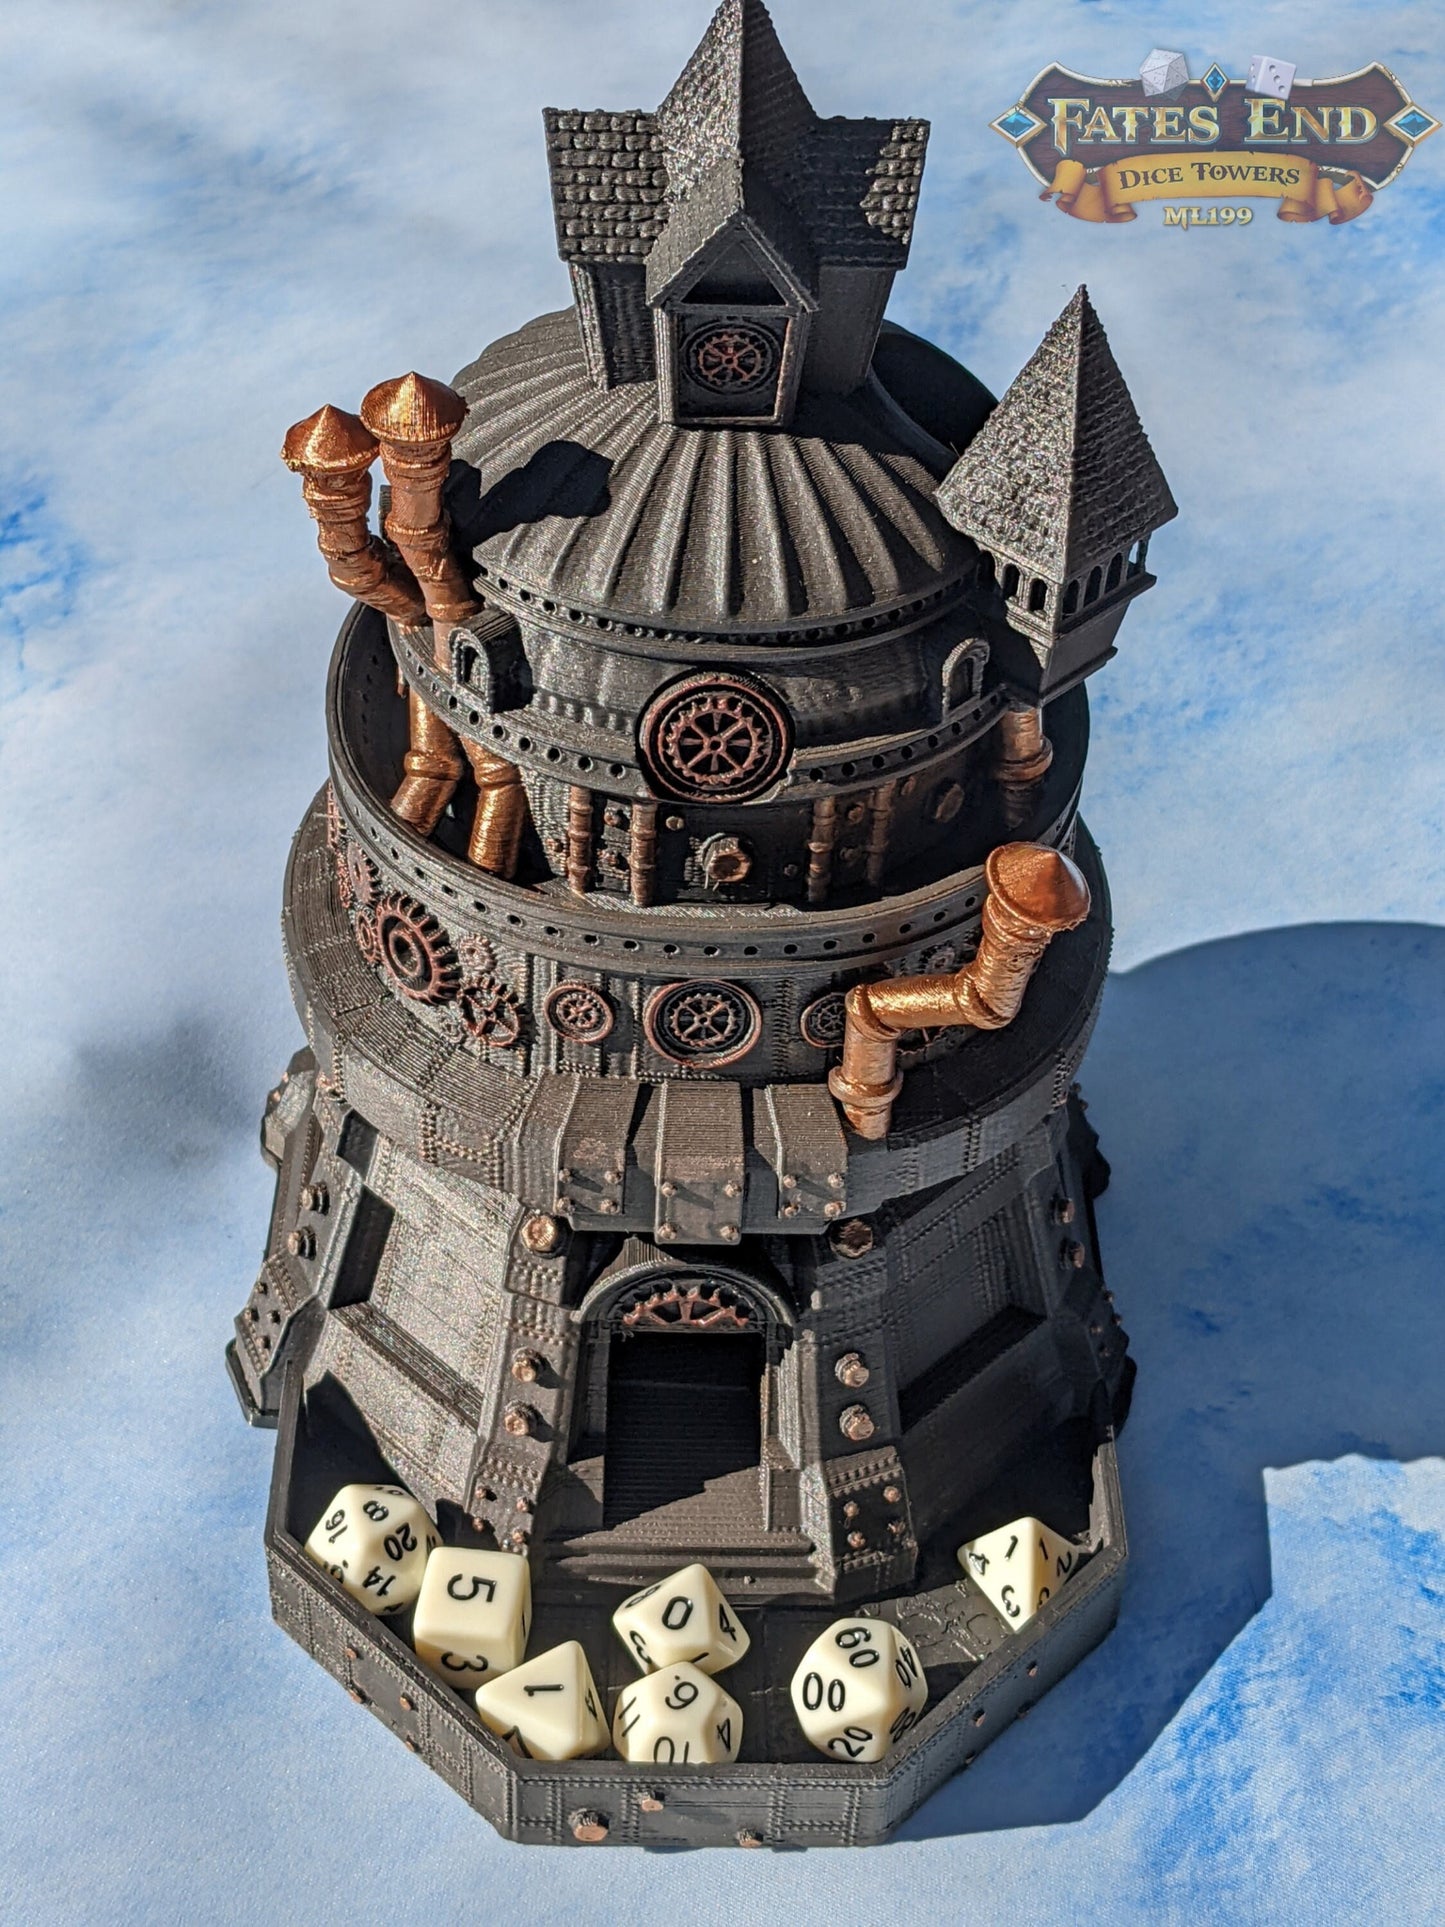 Artificer Class Steampunk 3D Printed Dice Tower- Fate's End - Embrace Precision with a Masterpiece of Dice-Rolling Ingenuity